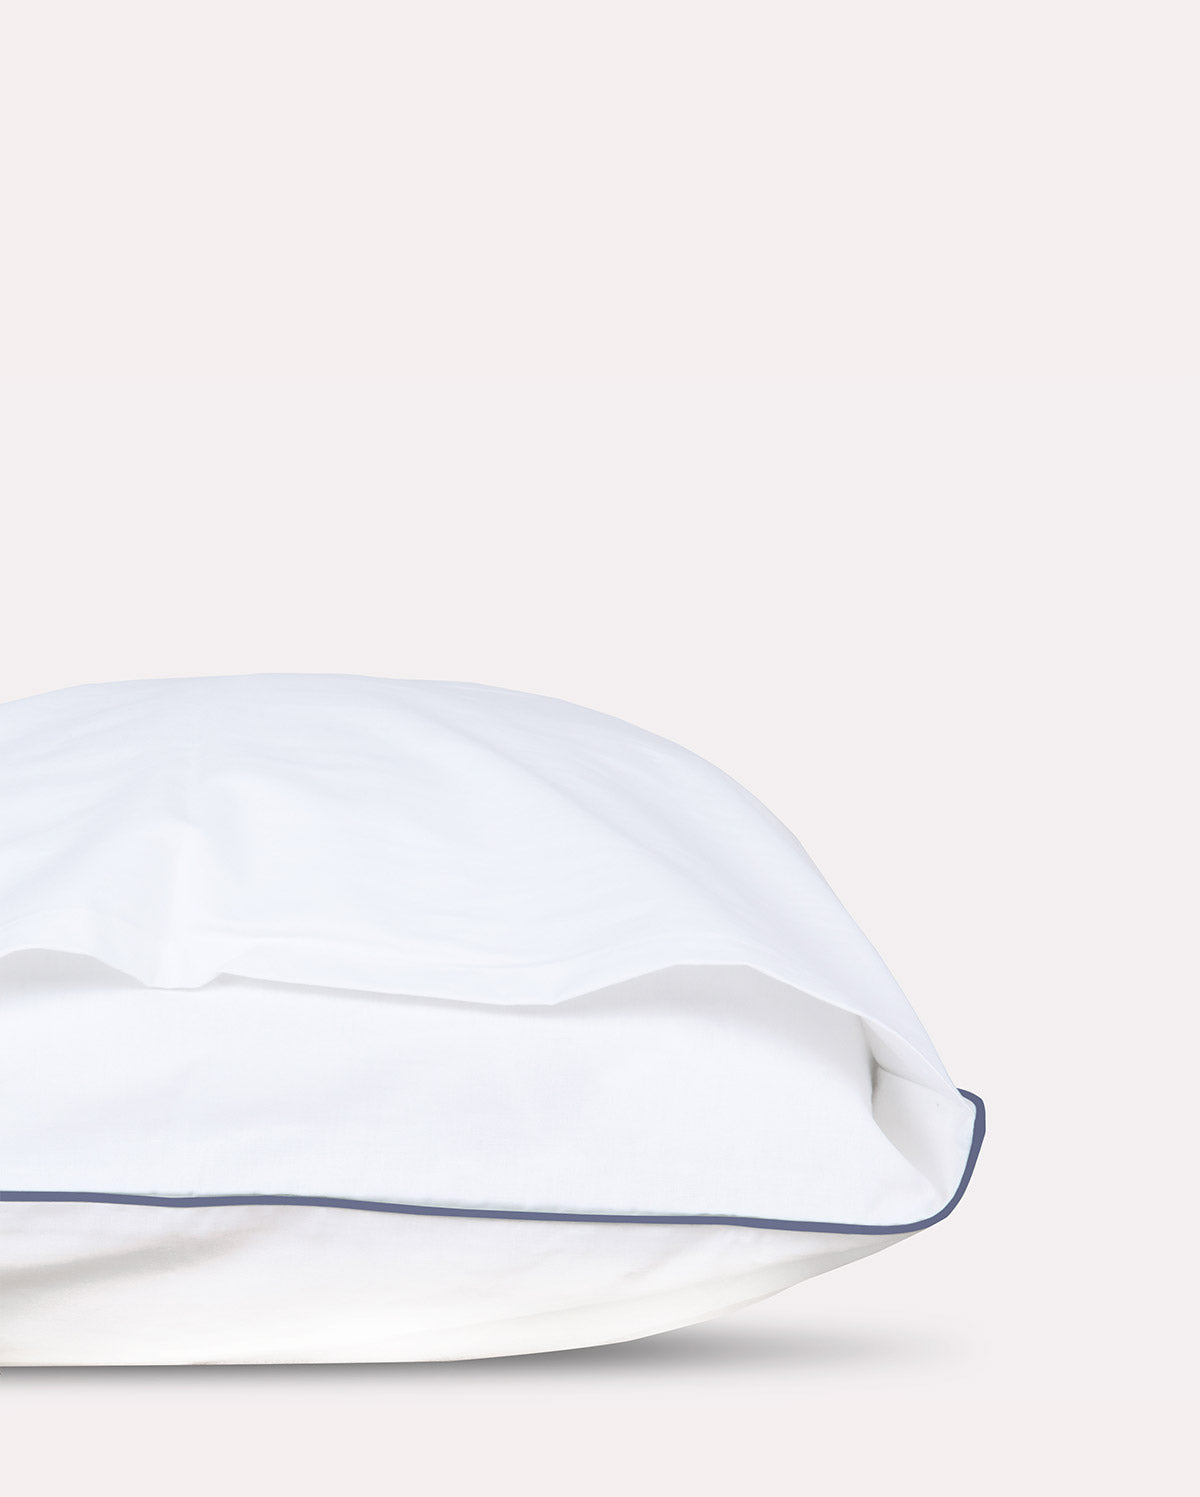 Classic Percale Pillowcase 2pcs- White with Navy Blue Pipe Edge